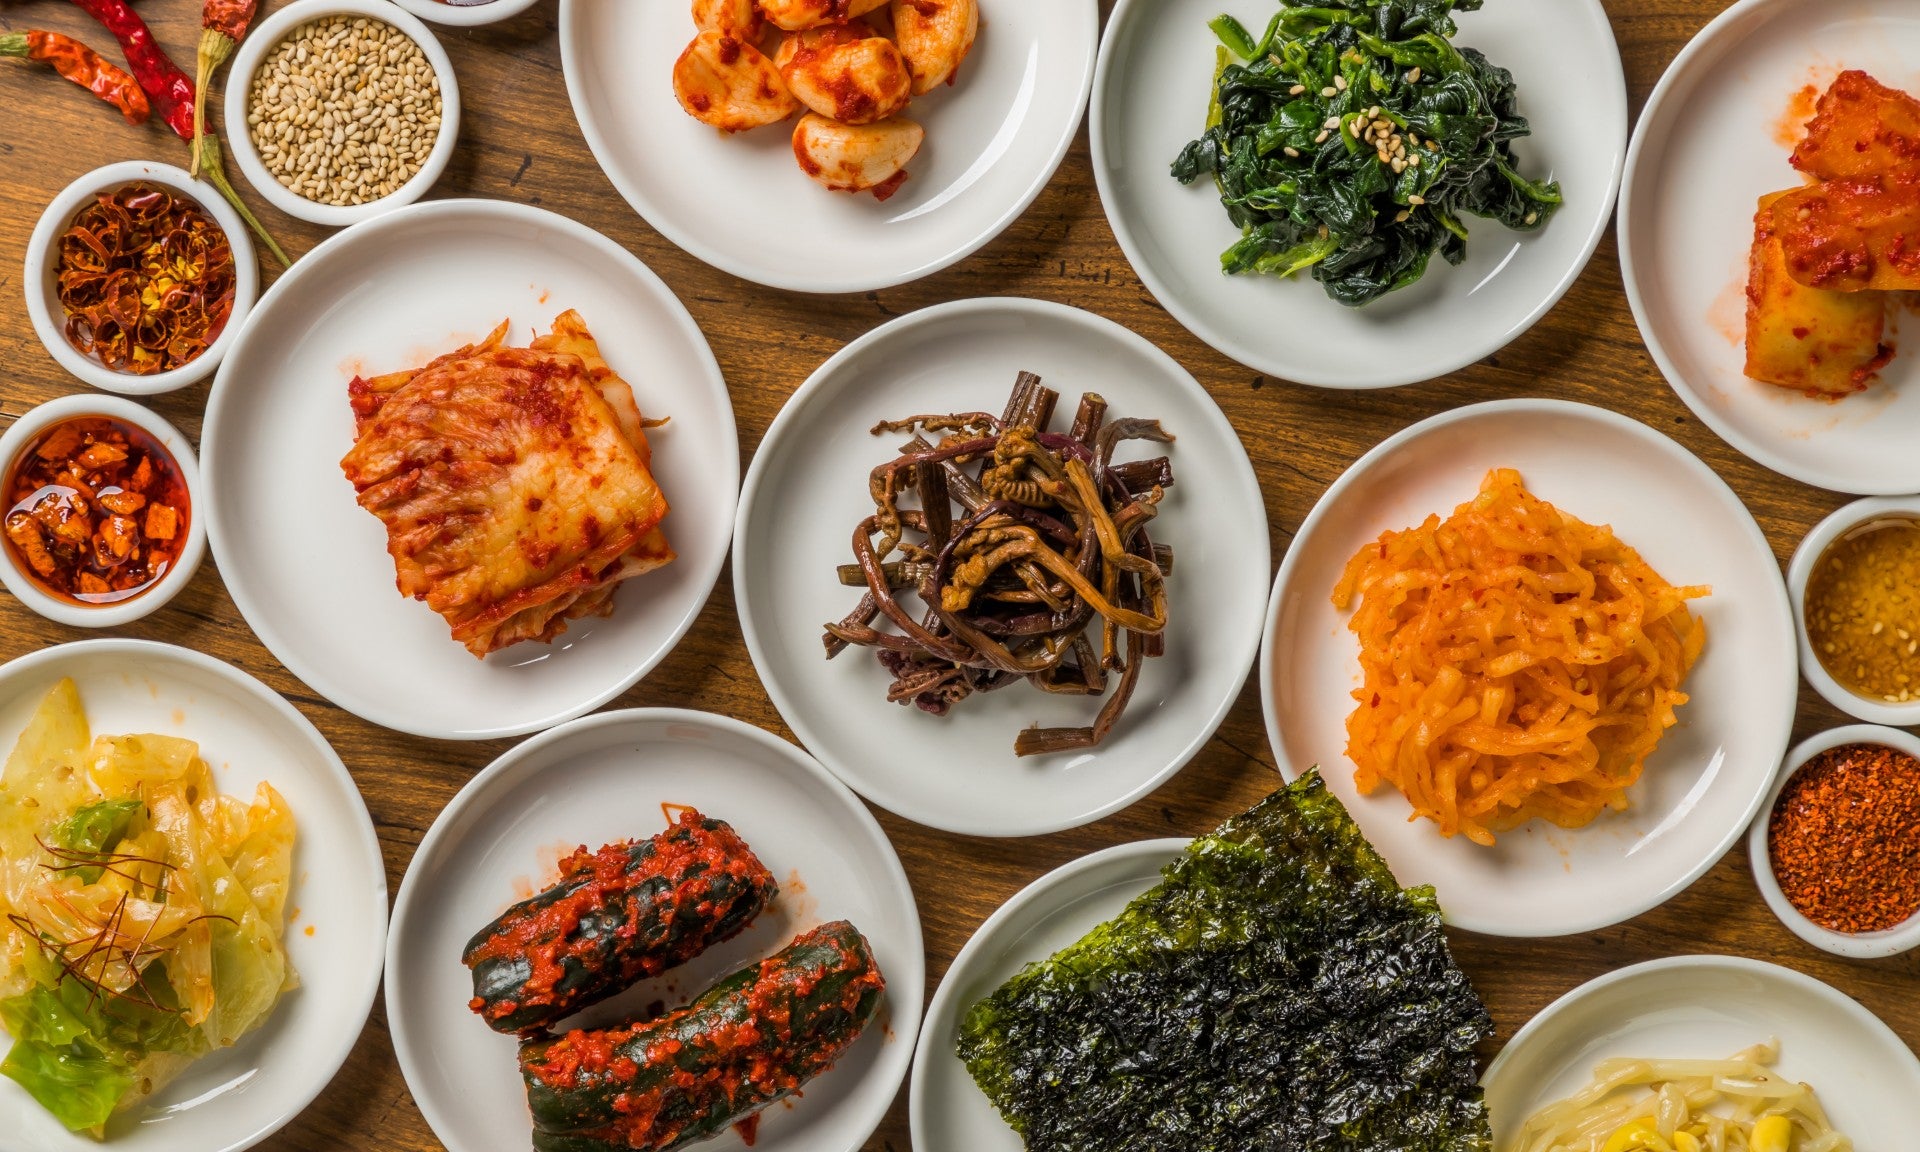 https://umamicart.com/cdn/shop/articles/From-rich-braised-meats-to-light-and-healthy-salads-banchan-bring-excitement-variety-and-balance-to-the-table.-Norikko_Shutterstock_2048x2048.jpg?v=1649965626